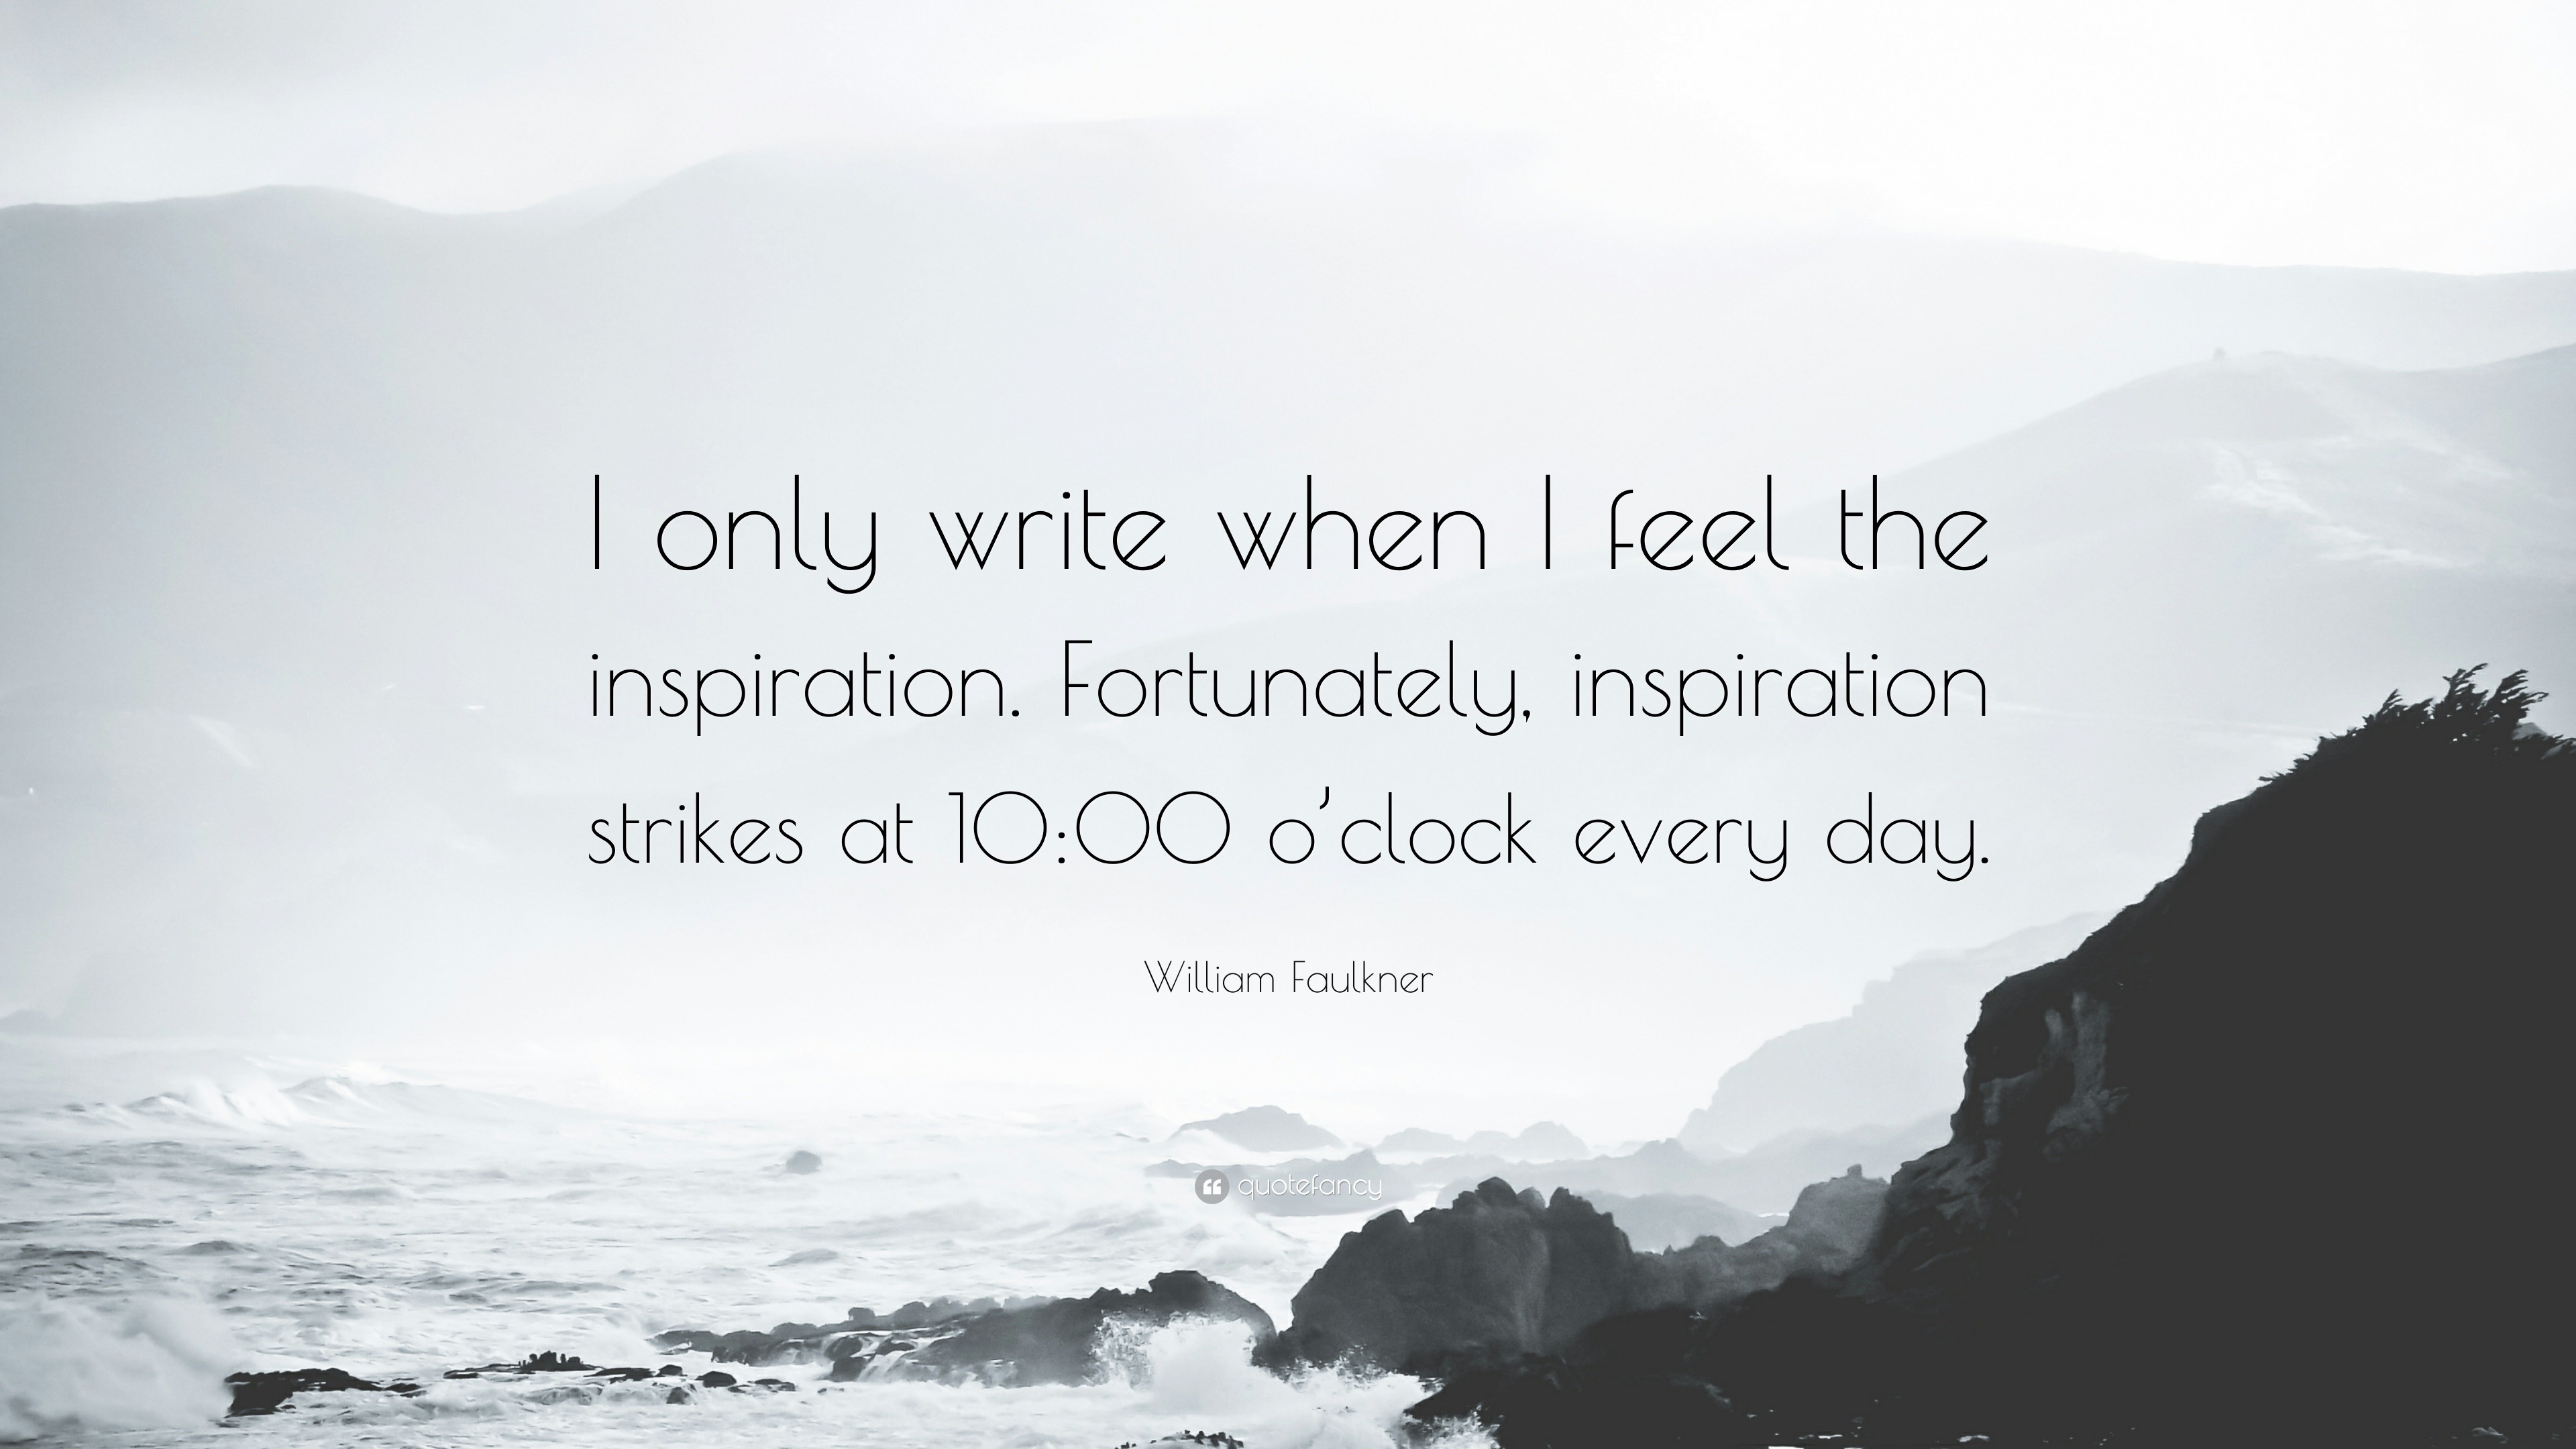 William Faulkner Quote I Only Write When I Feel The Inspiration Fortunately Inspiration Strikes At 10 00 O Clock Every Day 10 Wallpapers Quotefancy